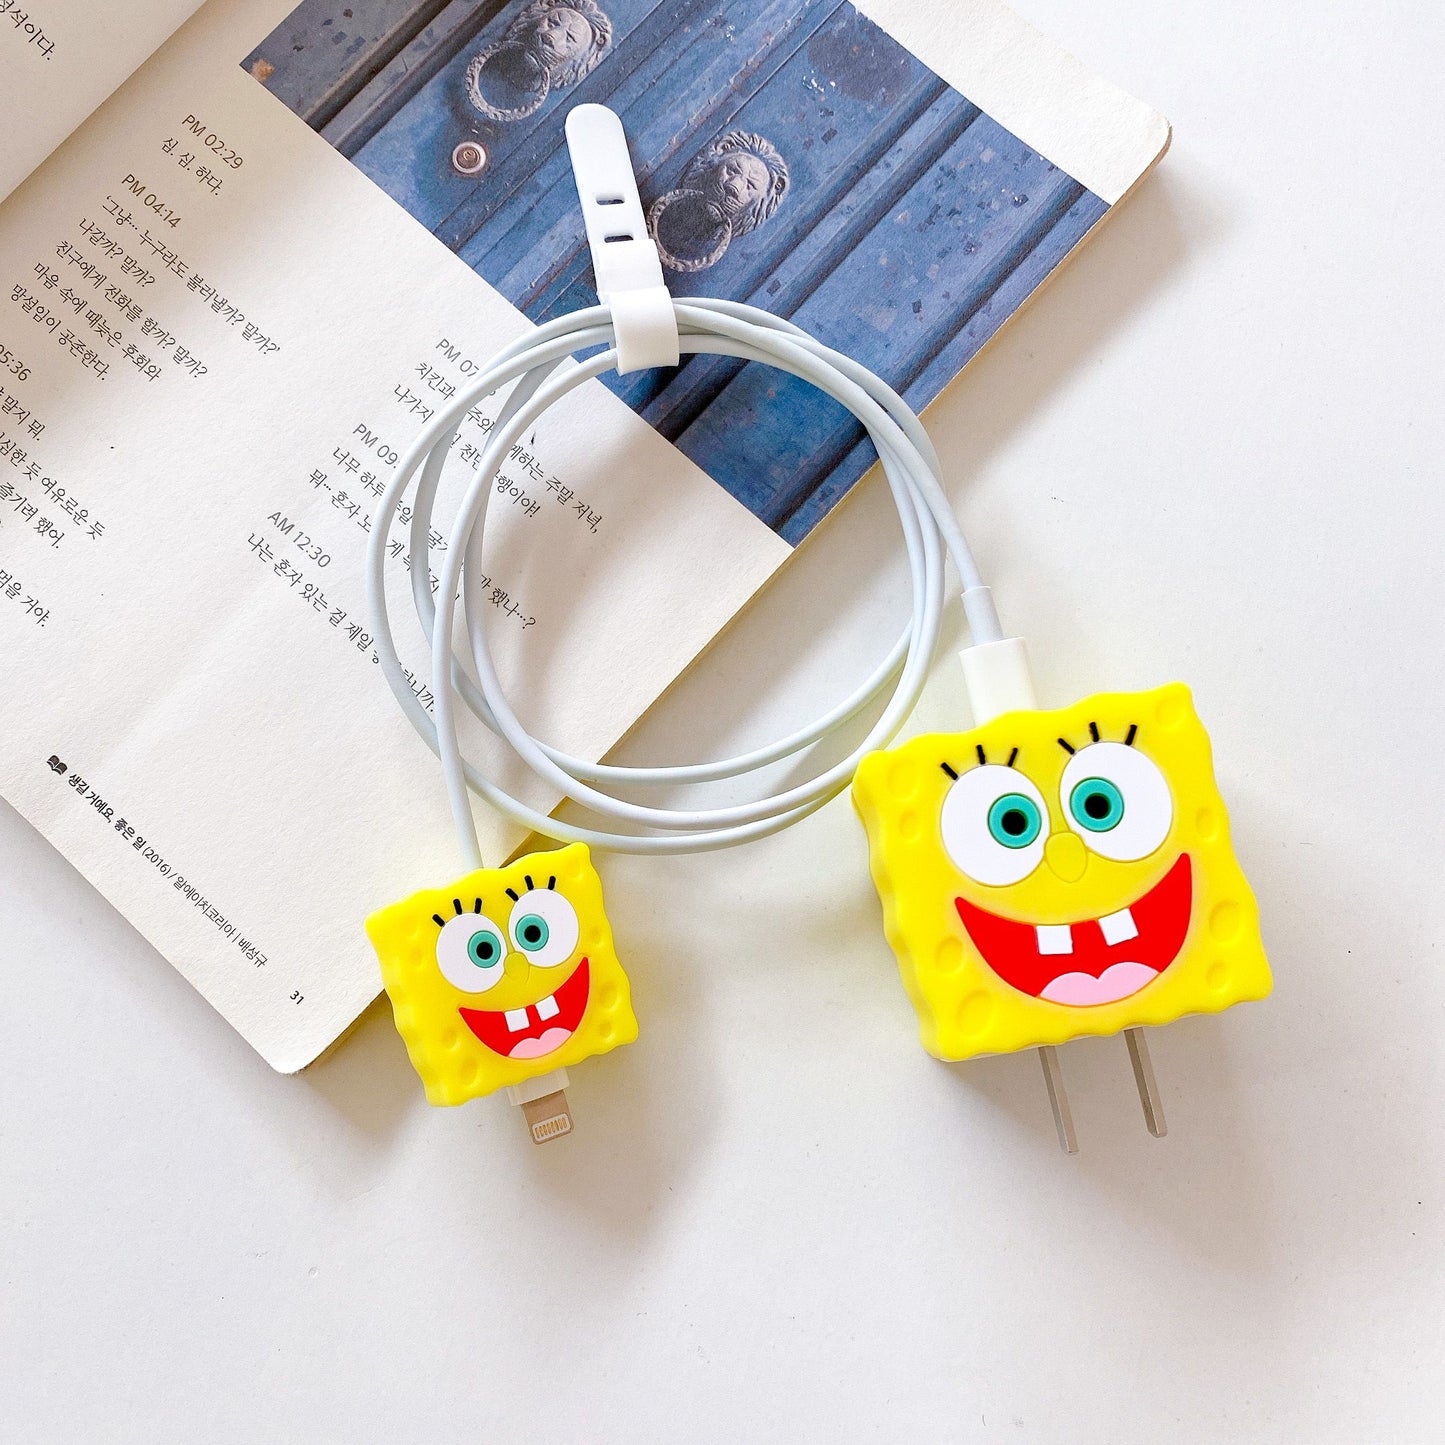 Spongebob Apple Charger Cover For 18-20W from hangingowl